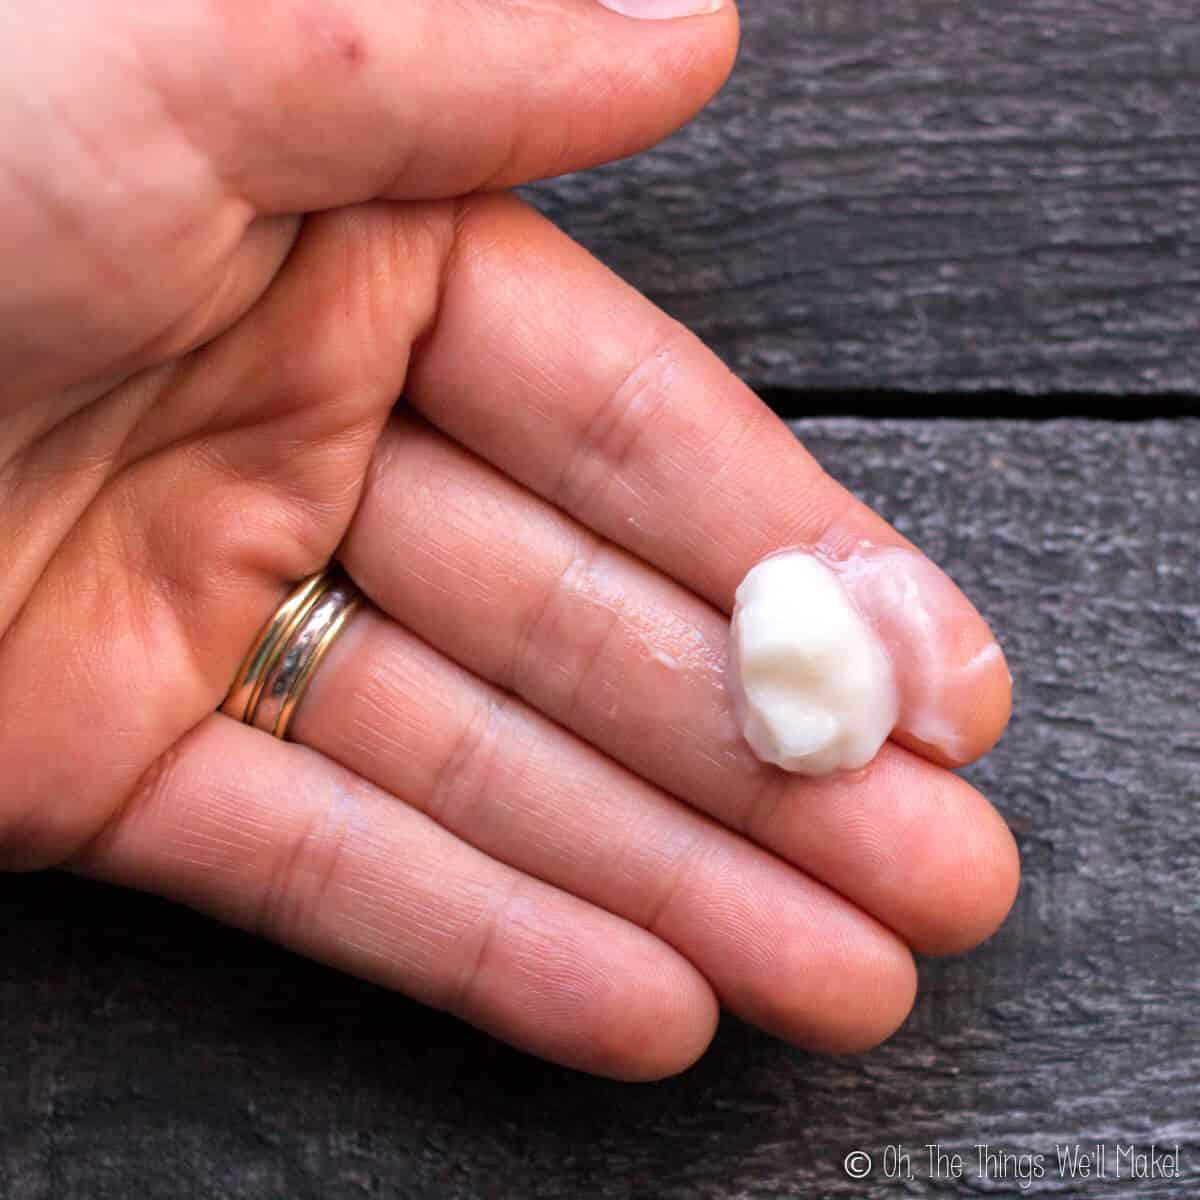 A dab of homemade conditioner in a person's hand